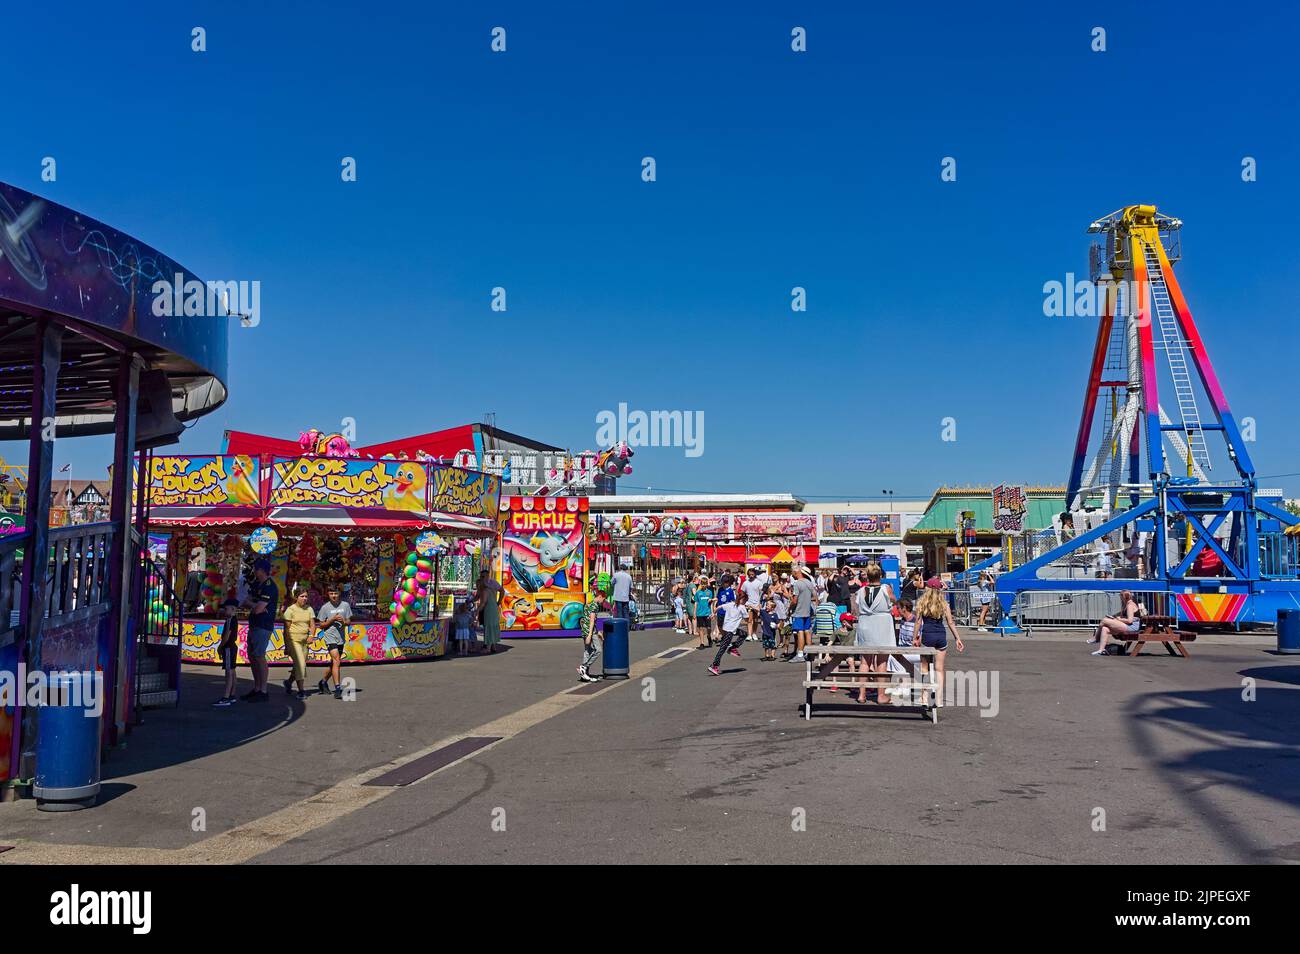 People enjoying the amusements at the seafront funfair in Skegness Stock Photo